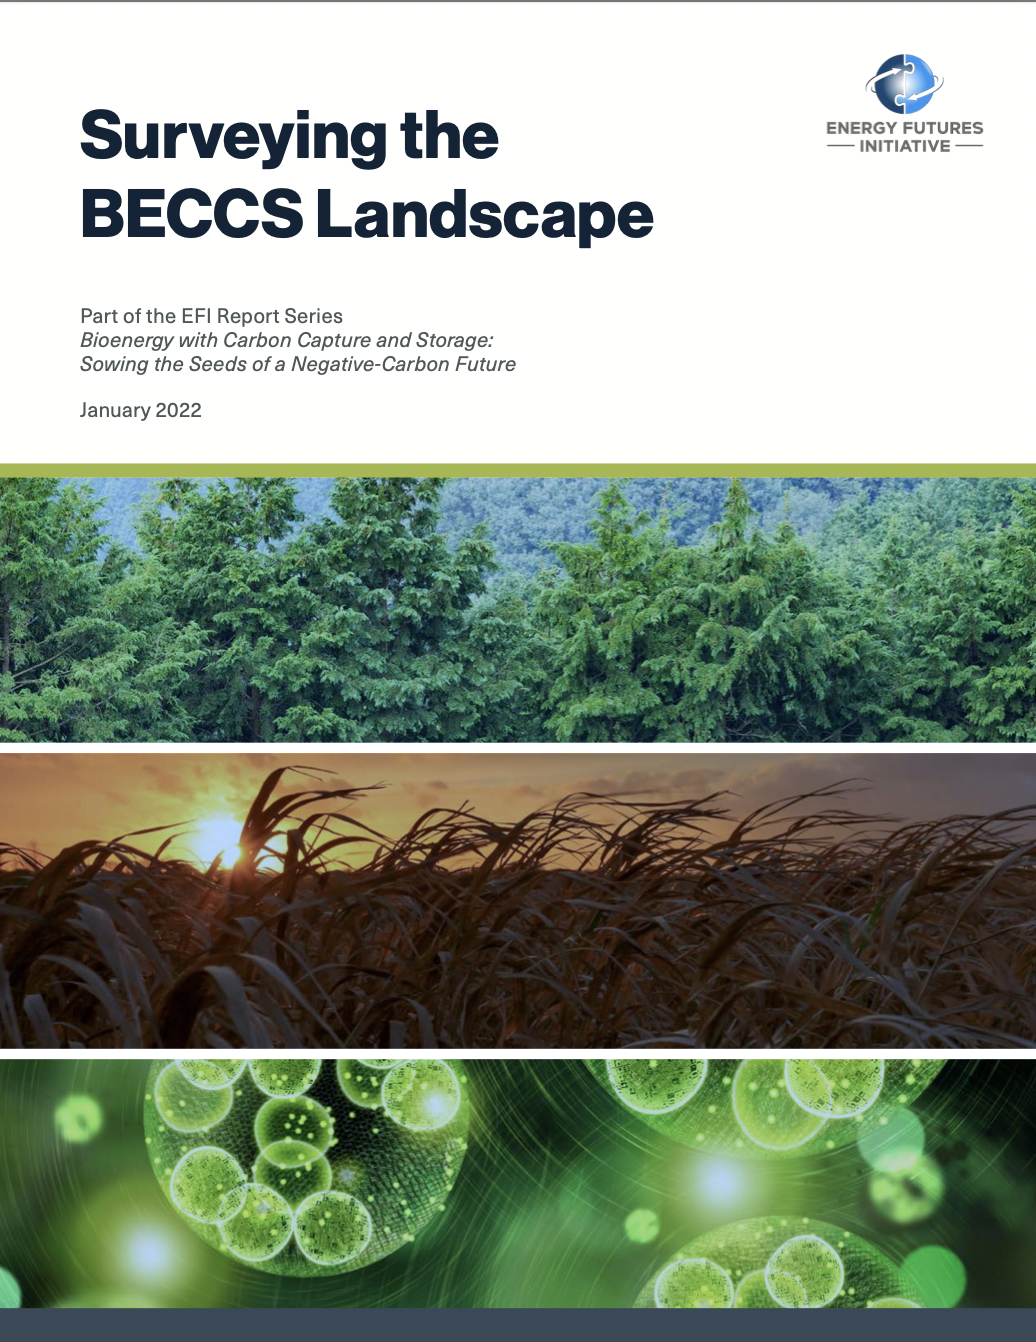 Cover of Surveying the BECCS Landscape with a photo of trees, an agricultural field, and green cells.